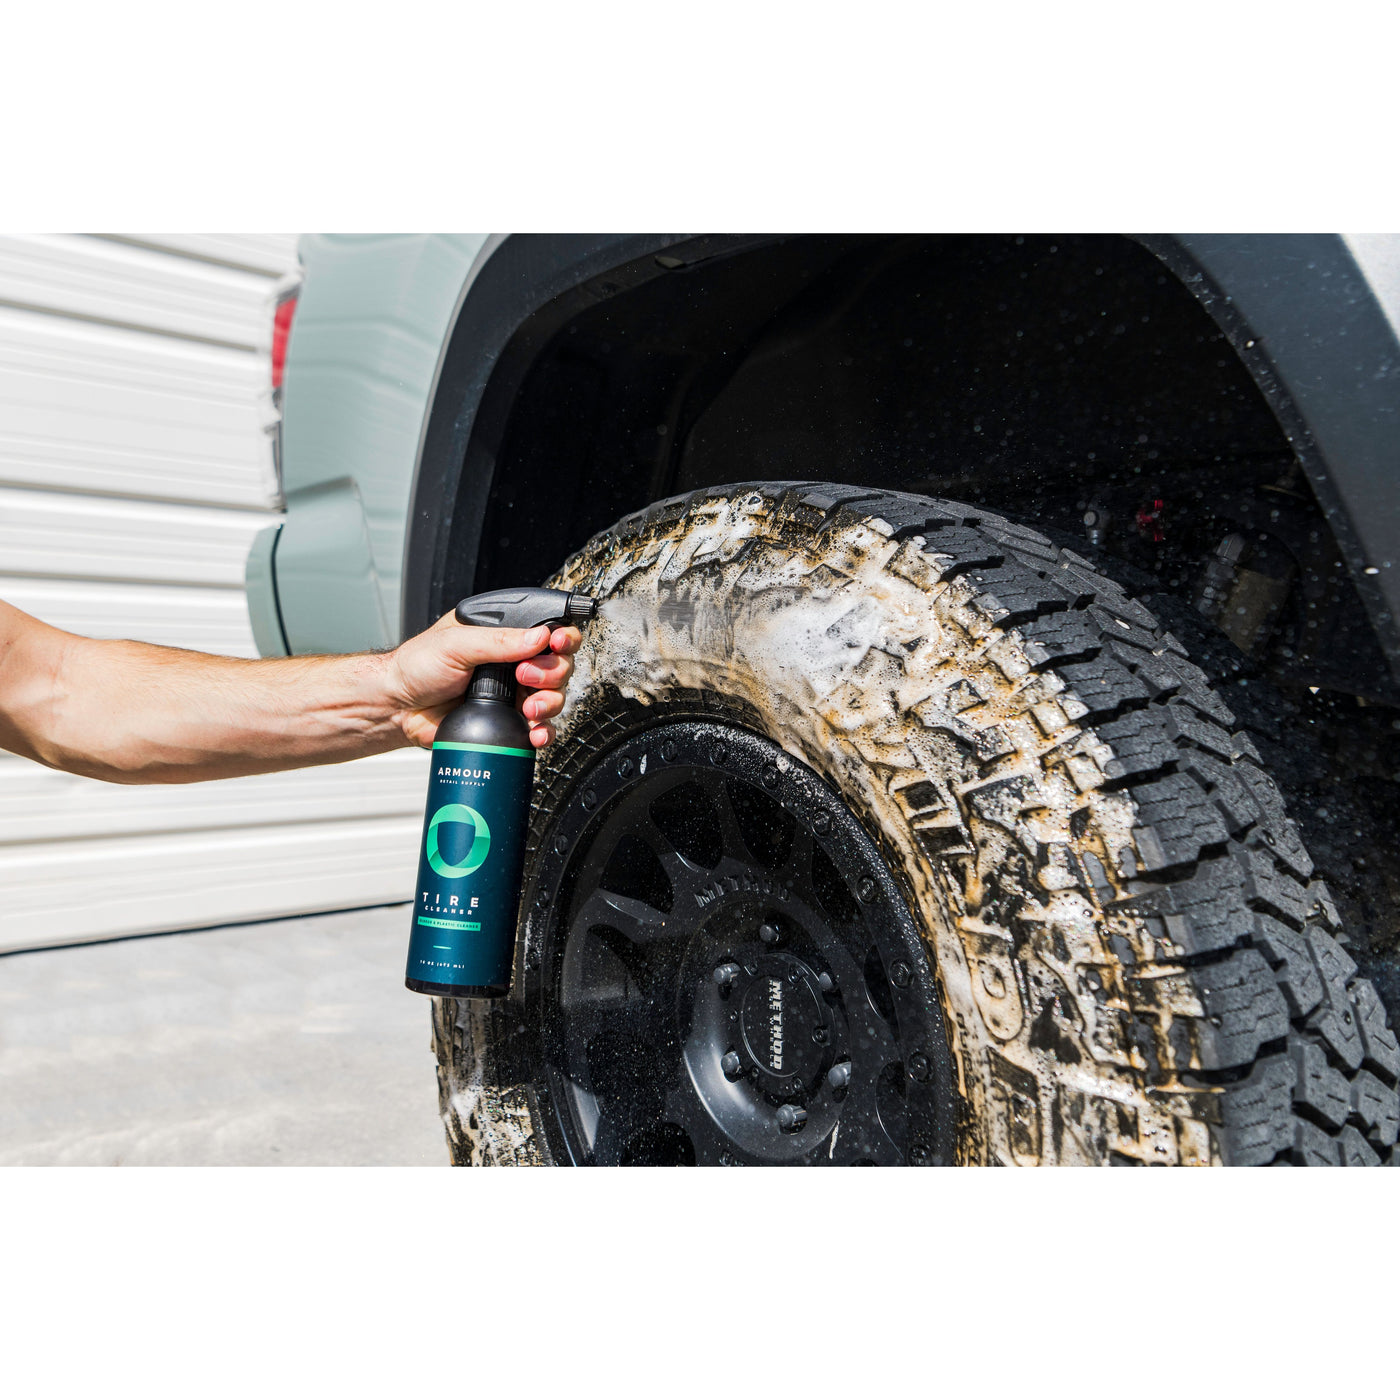 Tire Cleaner